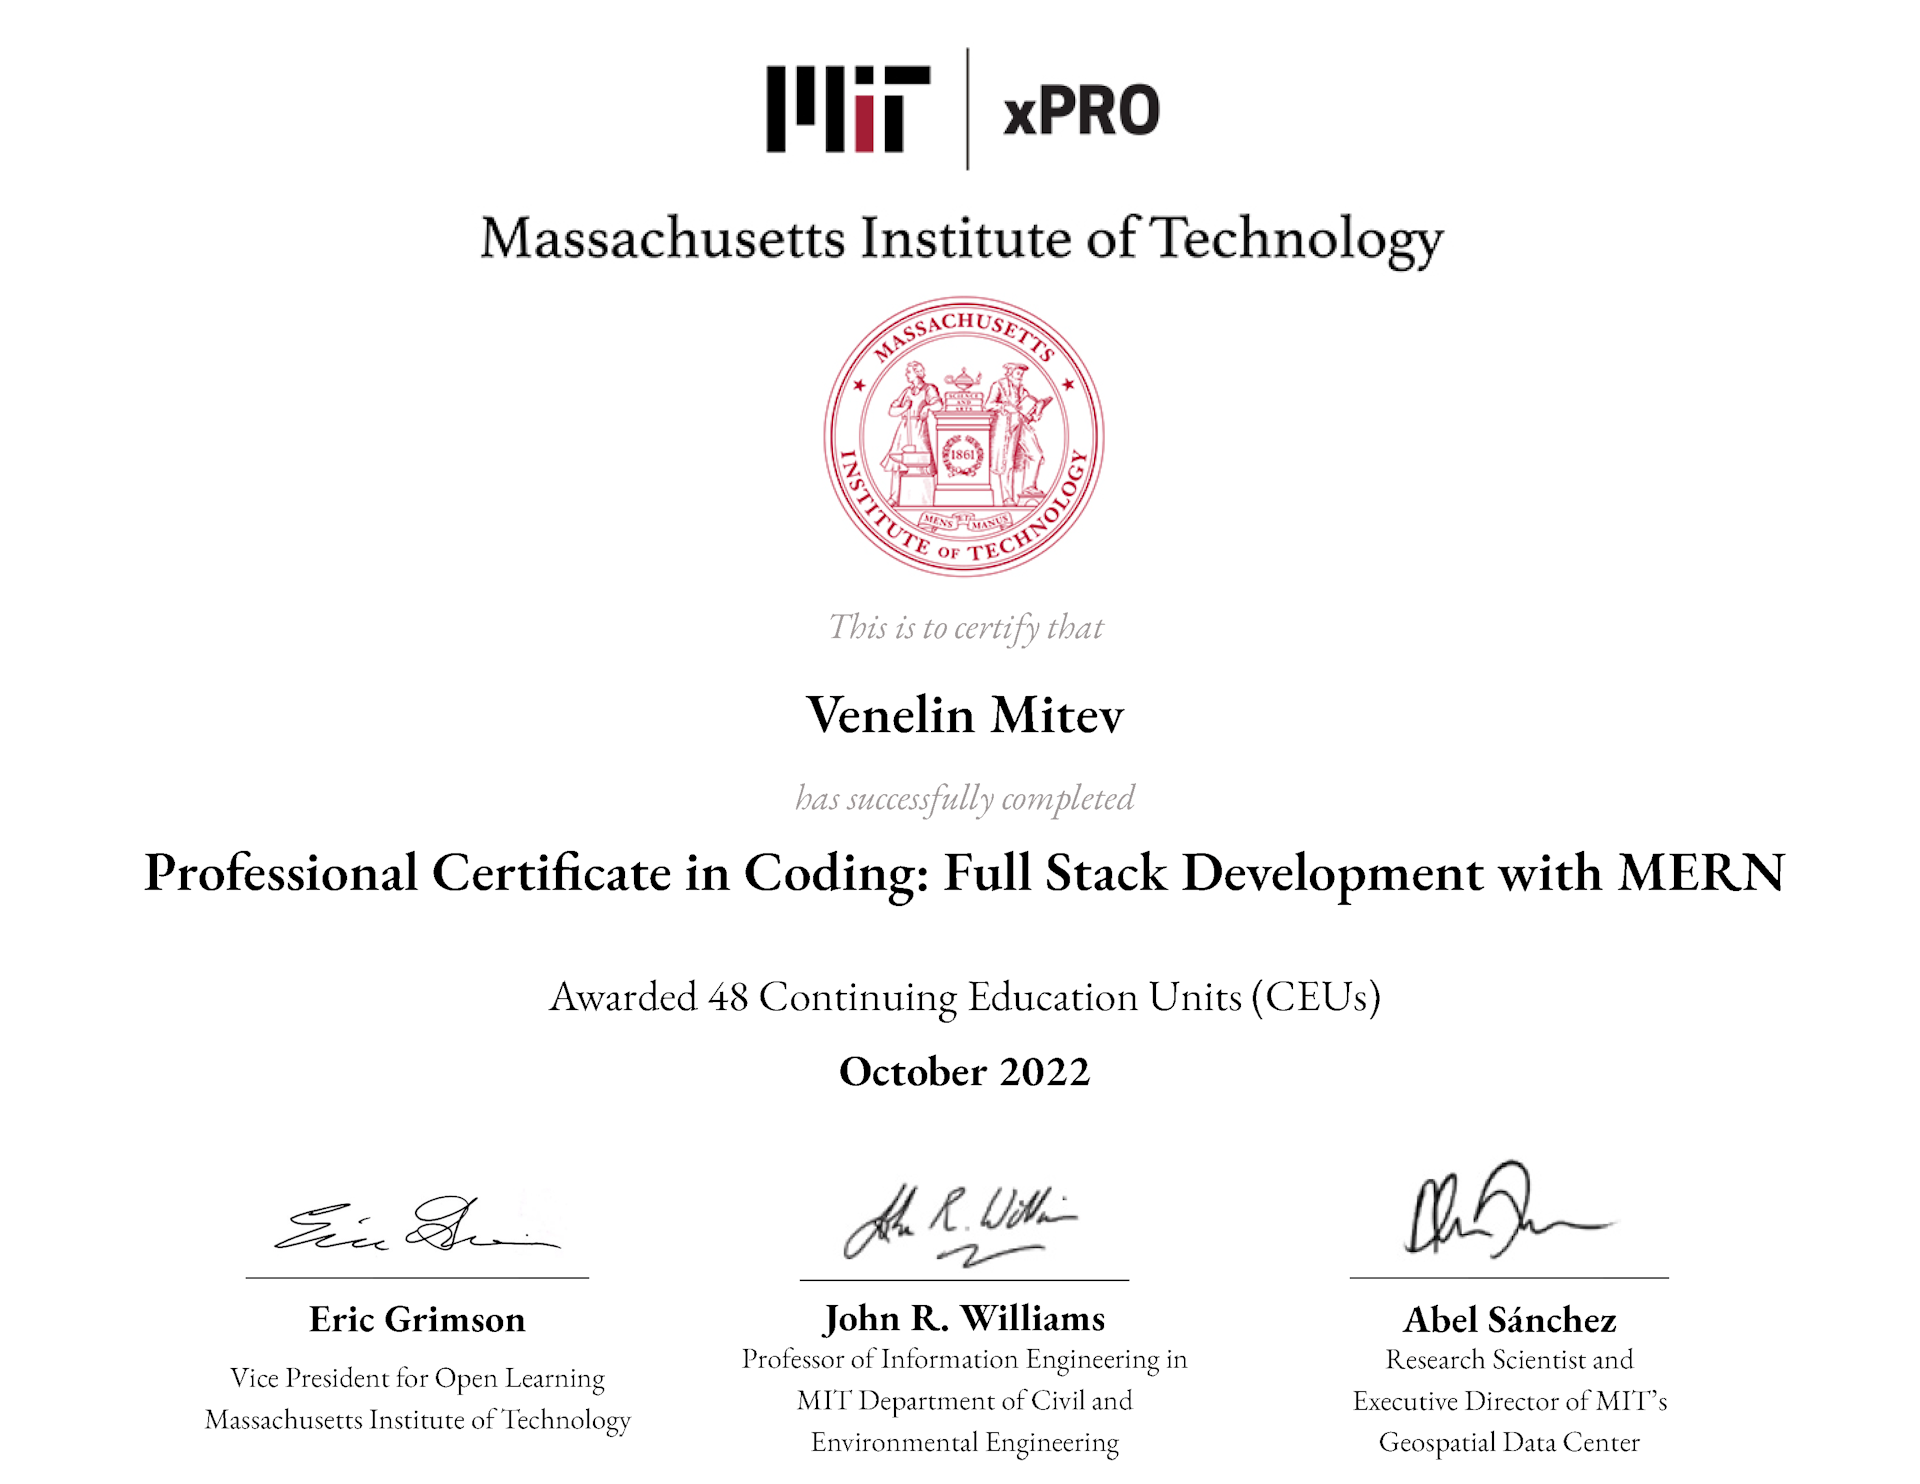 Professional Certificate in Full Stack Development with MERN Stack from Massachusetts Institute of Technology